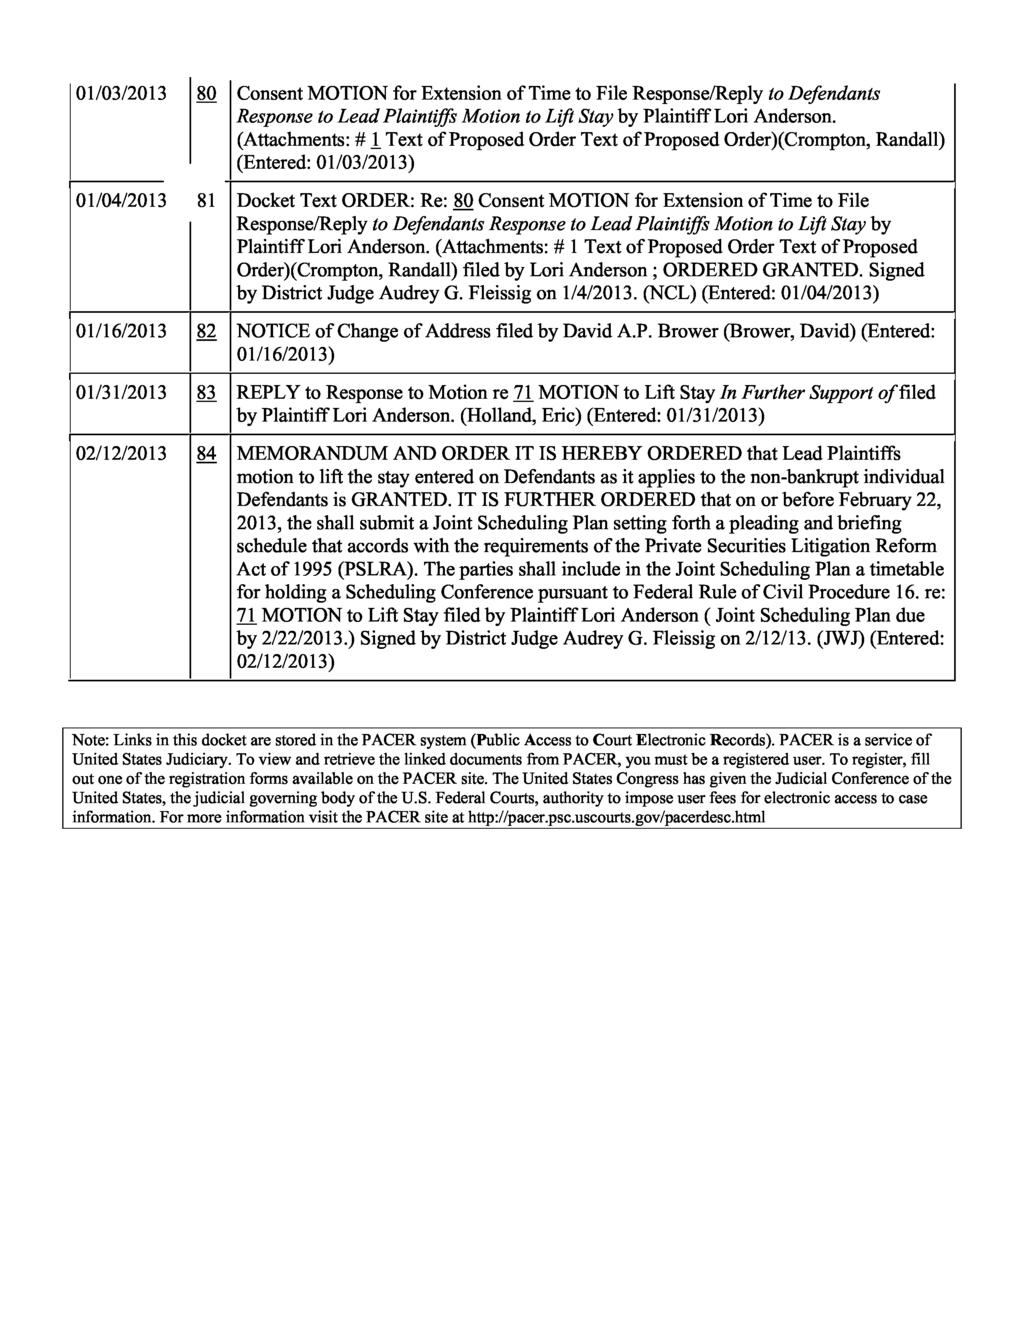 01/03/2013 80 Consent MOTION for Extension of Time to File Response/Reply to Defendants Response to Lead Plaintiffs Motion to Lift Stay by Plaintiff Lori Anderson.